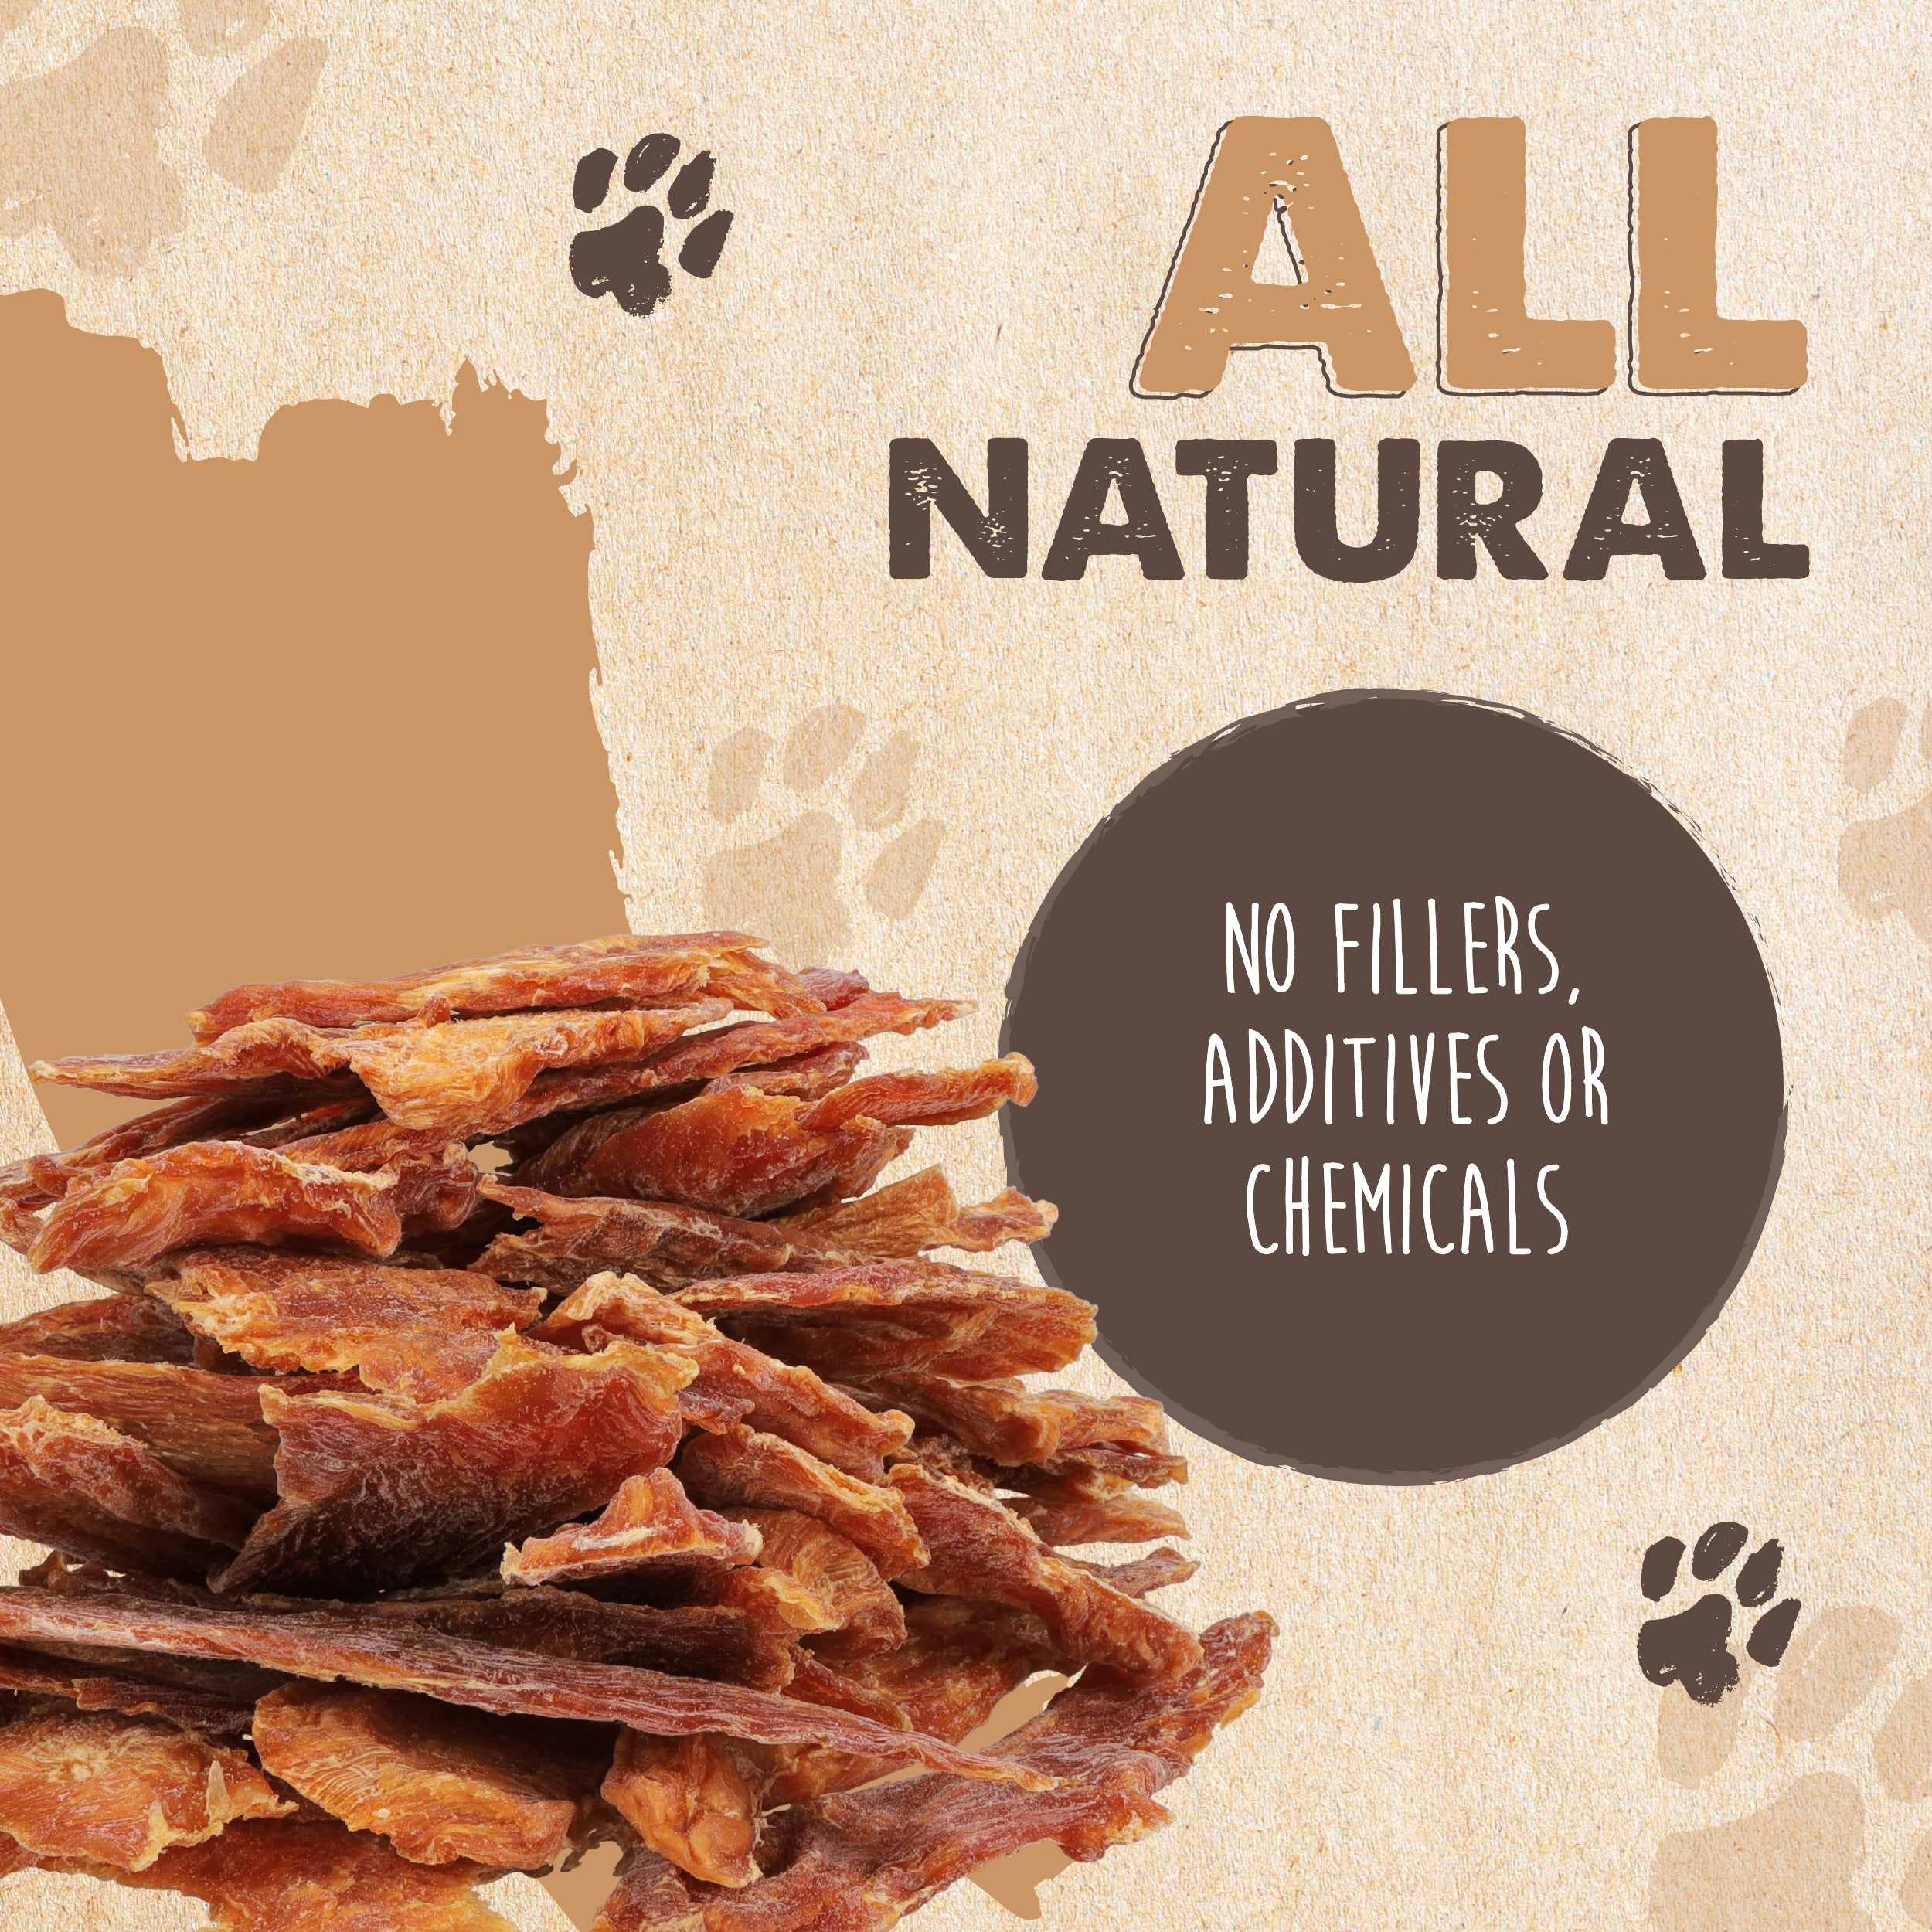 Mighty Paw Naturals Chicken Jerky: A Wholesome Snack for Dogs